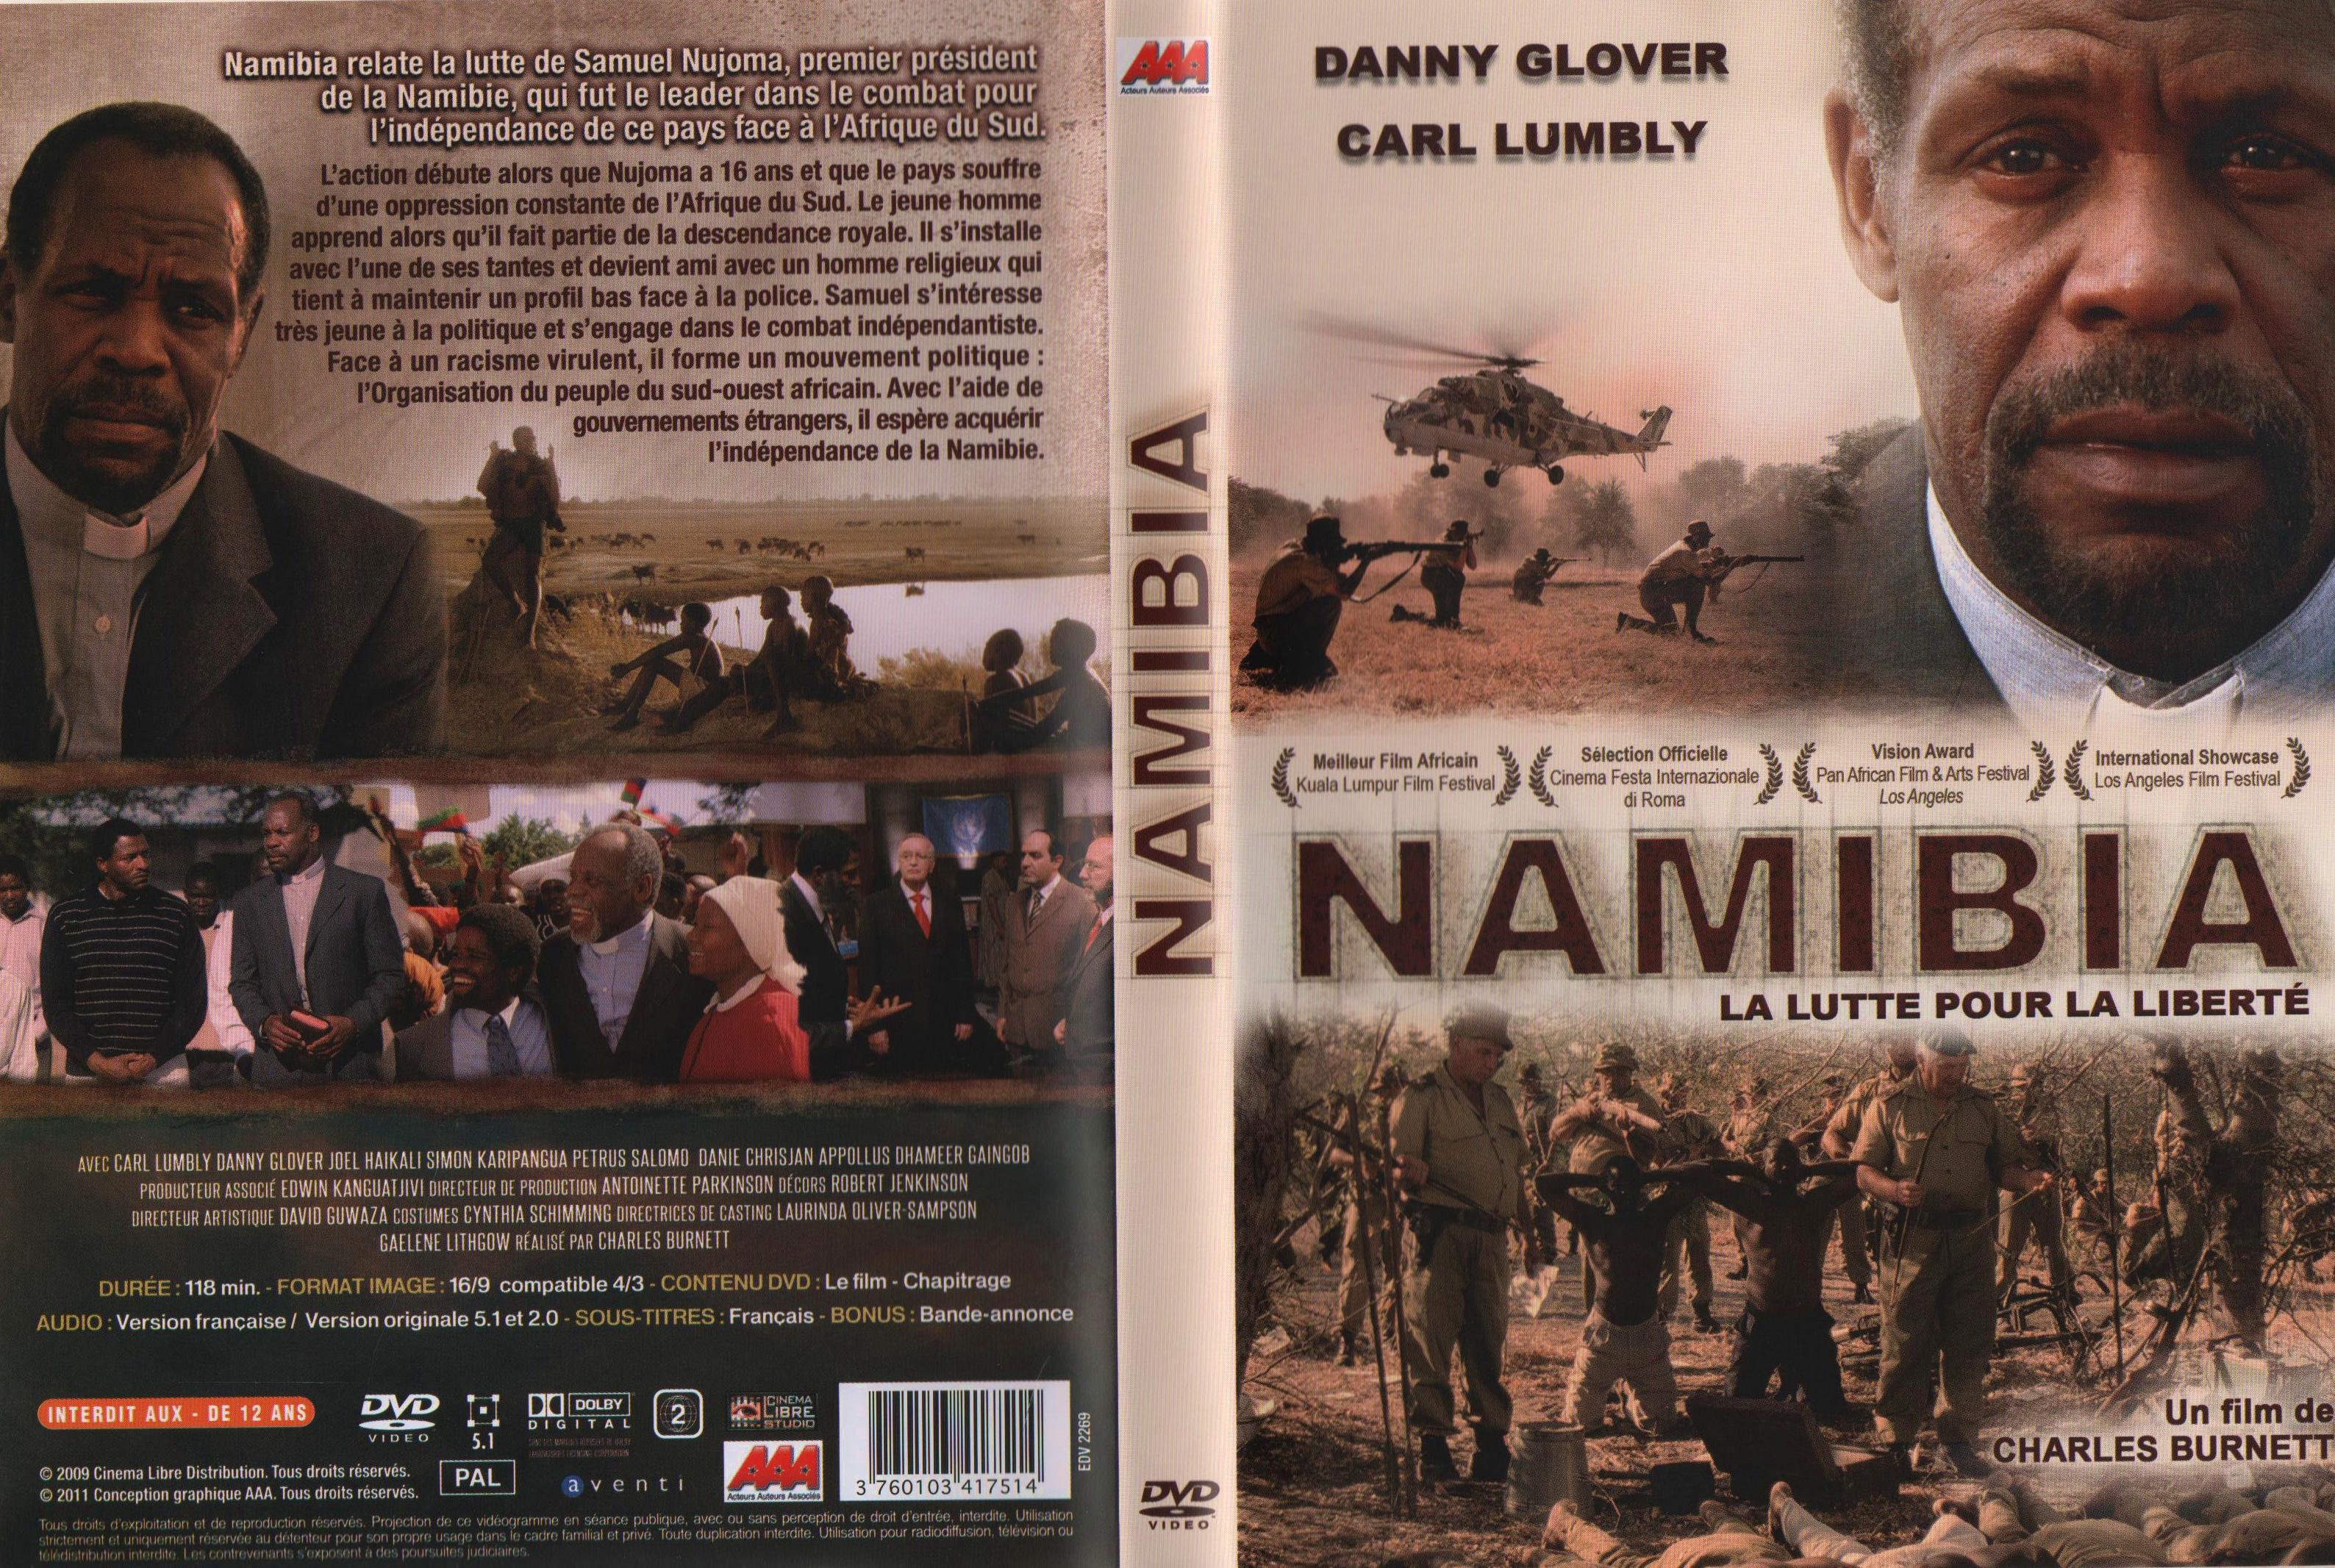 Jaquette DVD Namibia